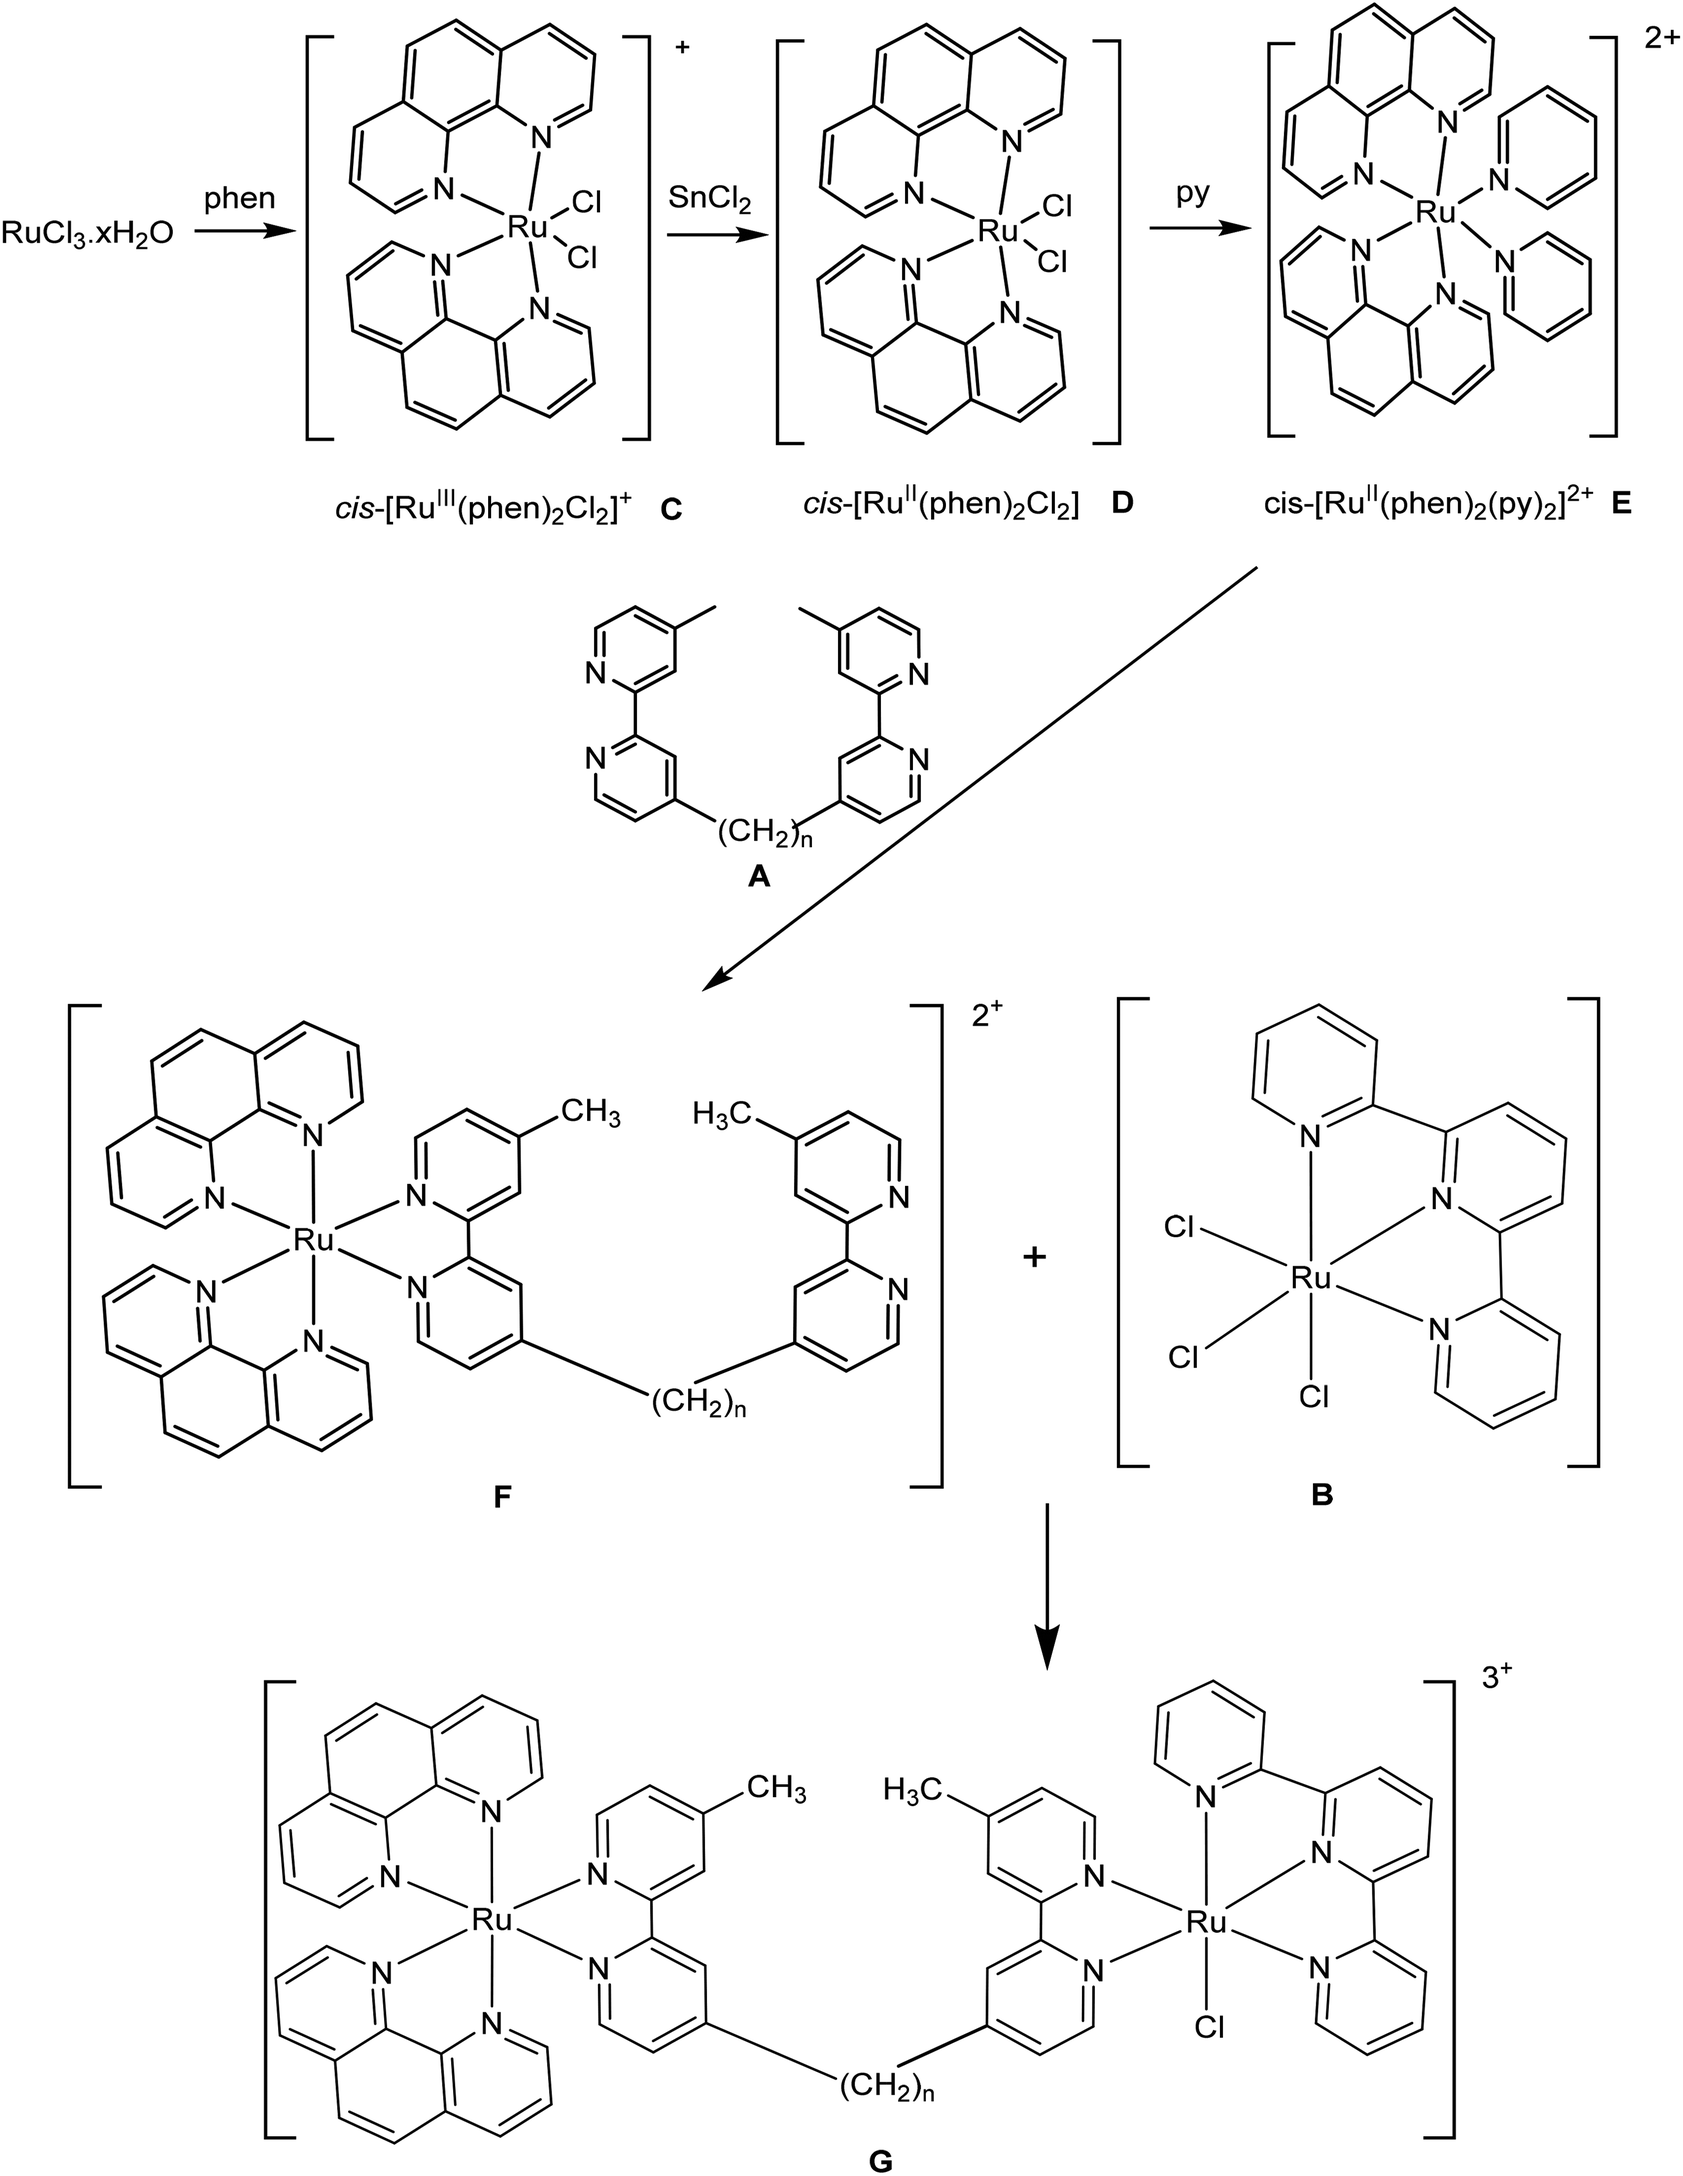 Dinuclear Ruthenium Ii Complexes Containing One Inert Metal Centre And One Coordinatively Labile Metal Centre Syntheses And Biological Activities Dalton Transactions Rsc Publishing Doi 10 1039 C5dt045k